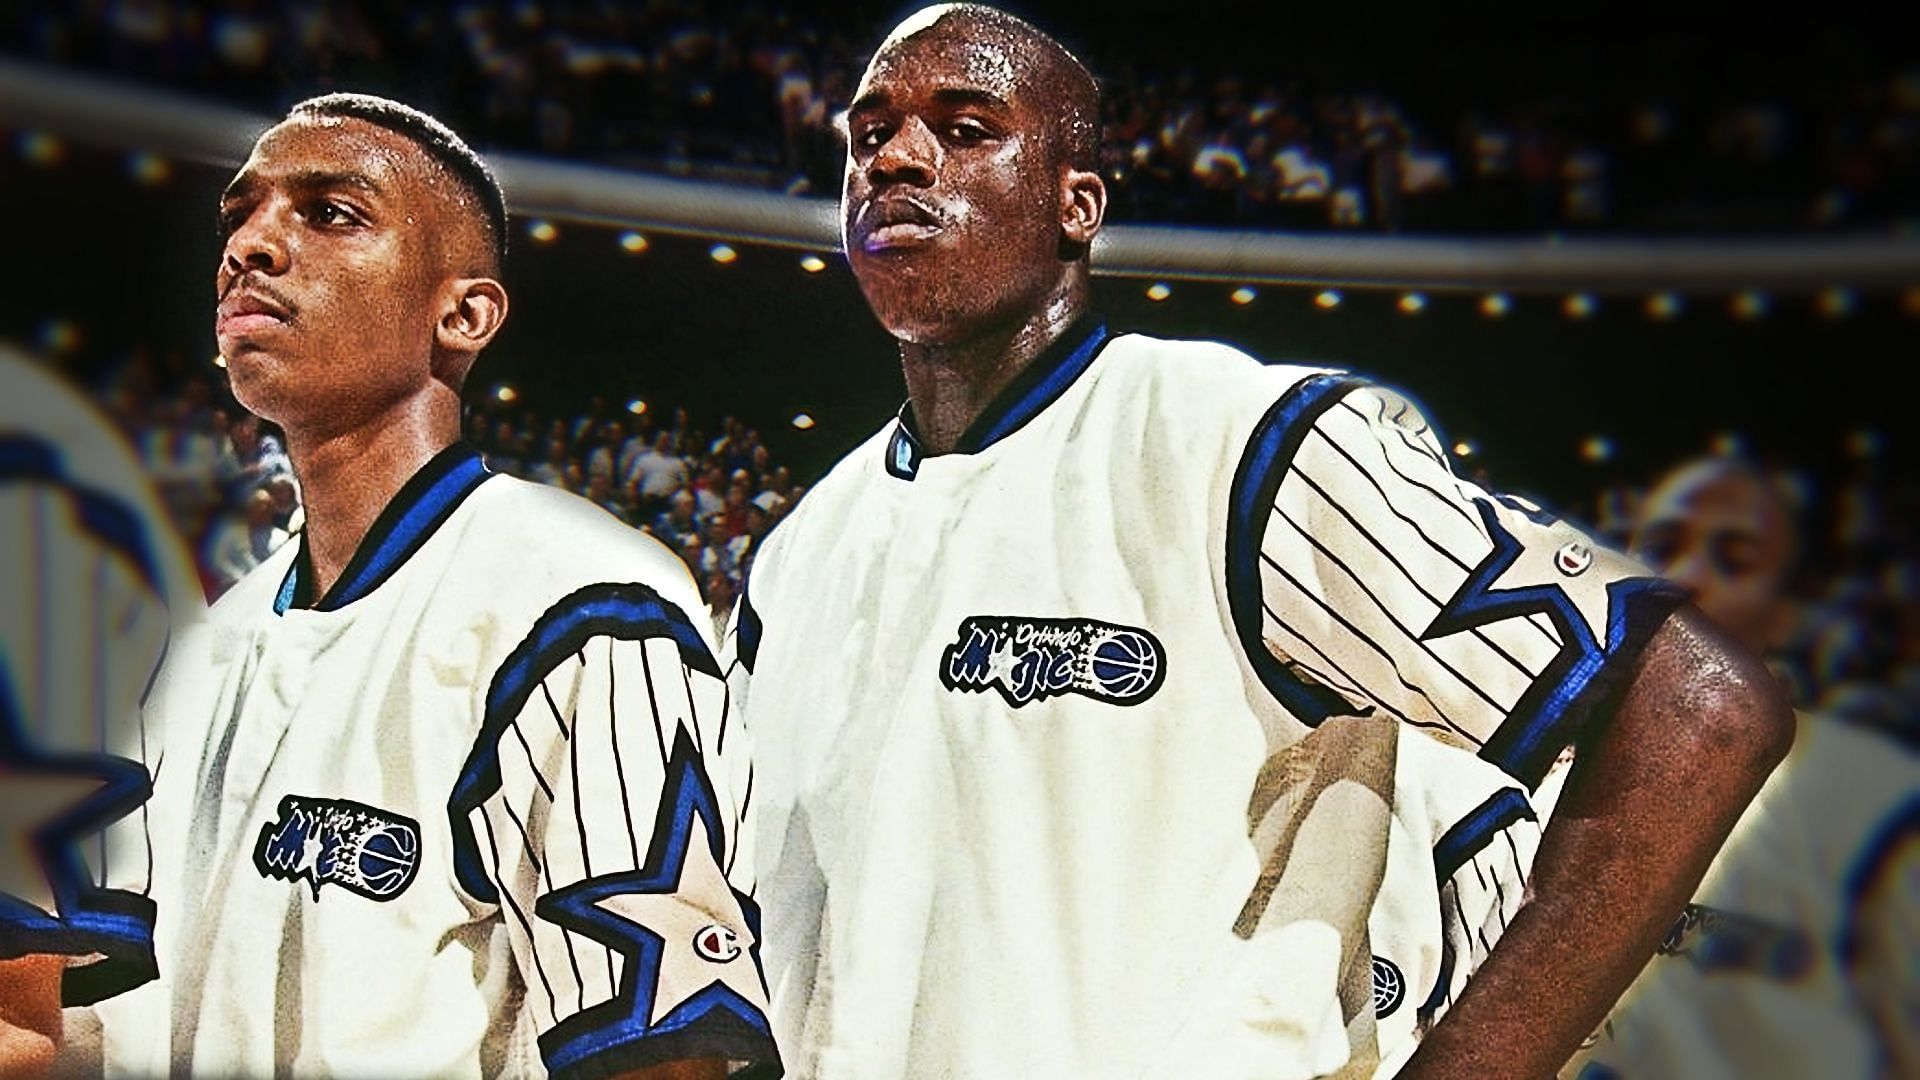 Shaquille O&#039;Neal contends that if not for injuries, Penny Hardaway would have been a top 3 player all-time in the NBA. [Photo: Oldskoolbball.com]